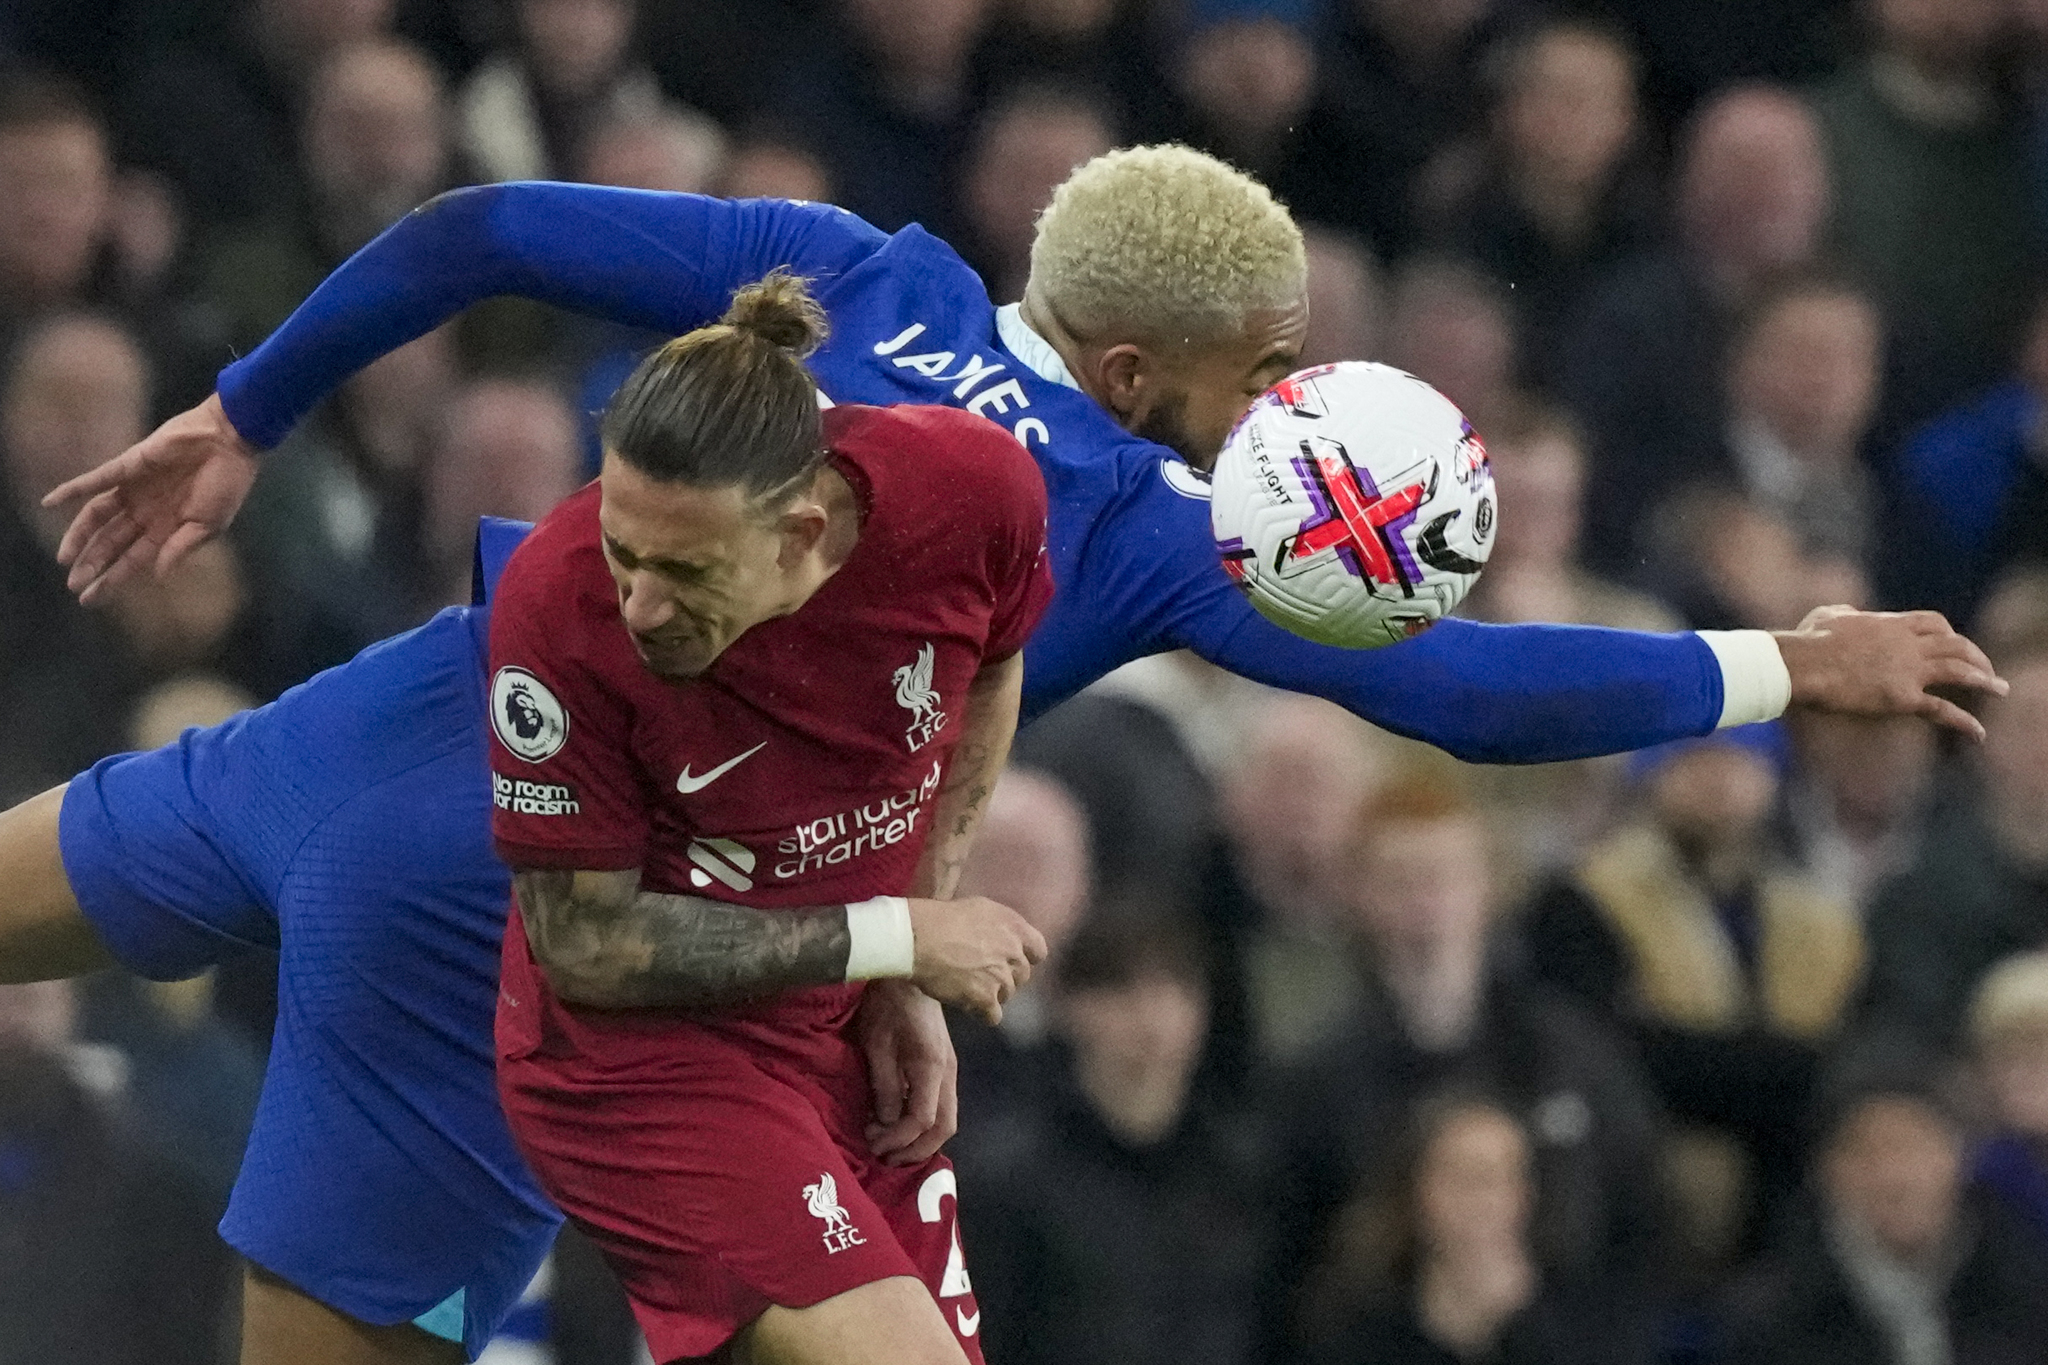 Liverpool's Kostas Tsimikas, front, jumps for the ball with  lt;HIT gt;Chelsea lt;/HIT gt;'s Reece James during the English Premier League soccer match between  lt;HIT gt;Chelsea lt;/HIT gt; and Liverpool at Stamford Bridge stadium in London, Tuesday, April 4, 2023. (AP Photo/Frank Augstein)